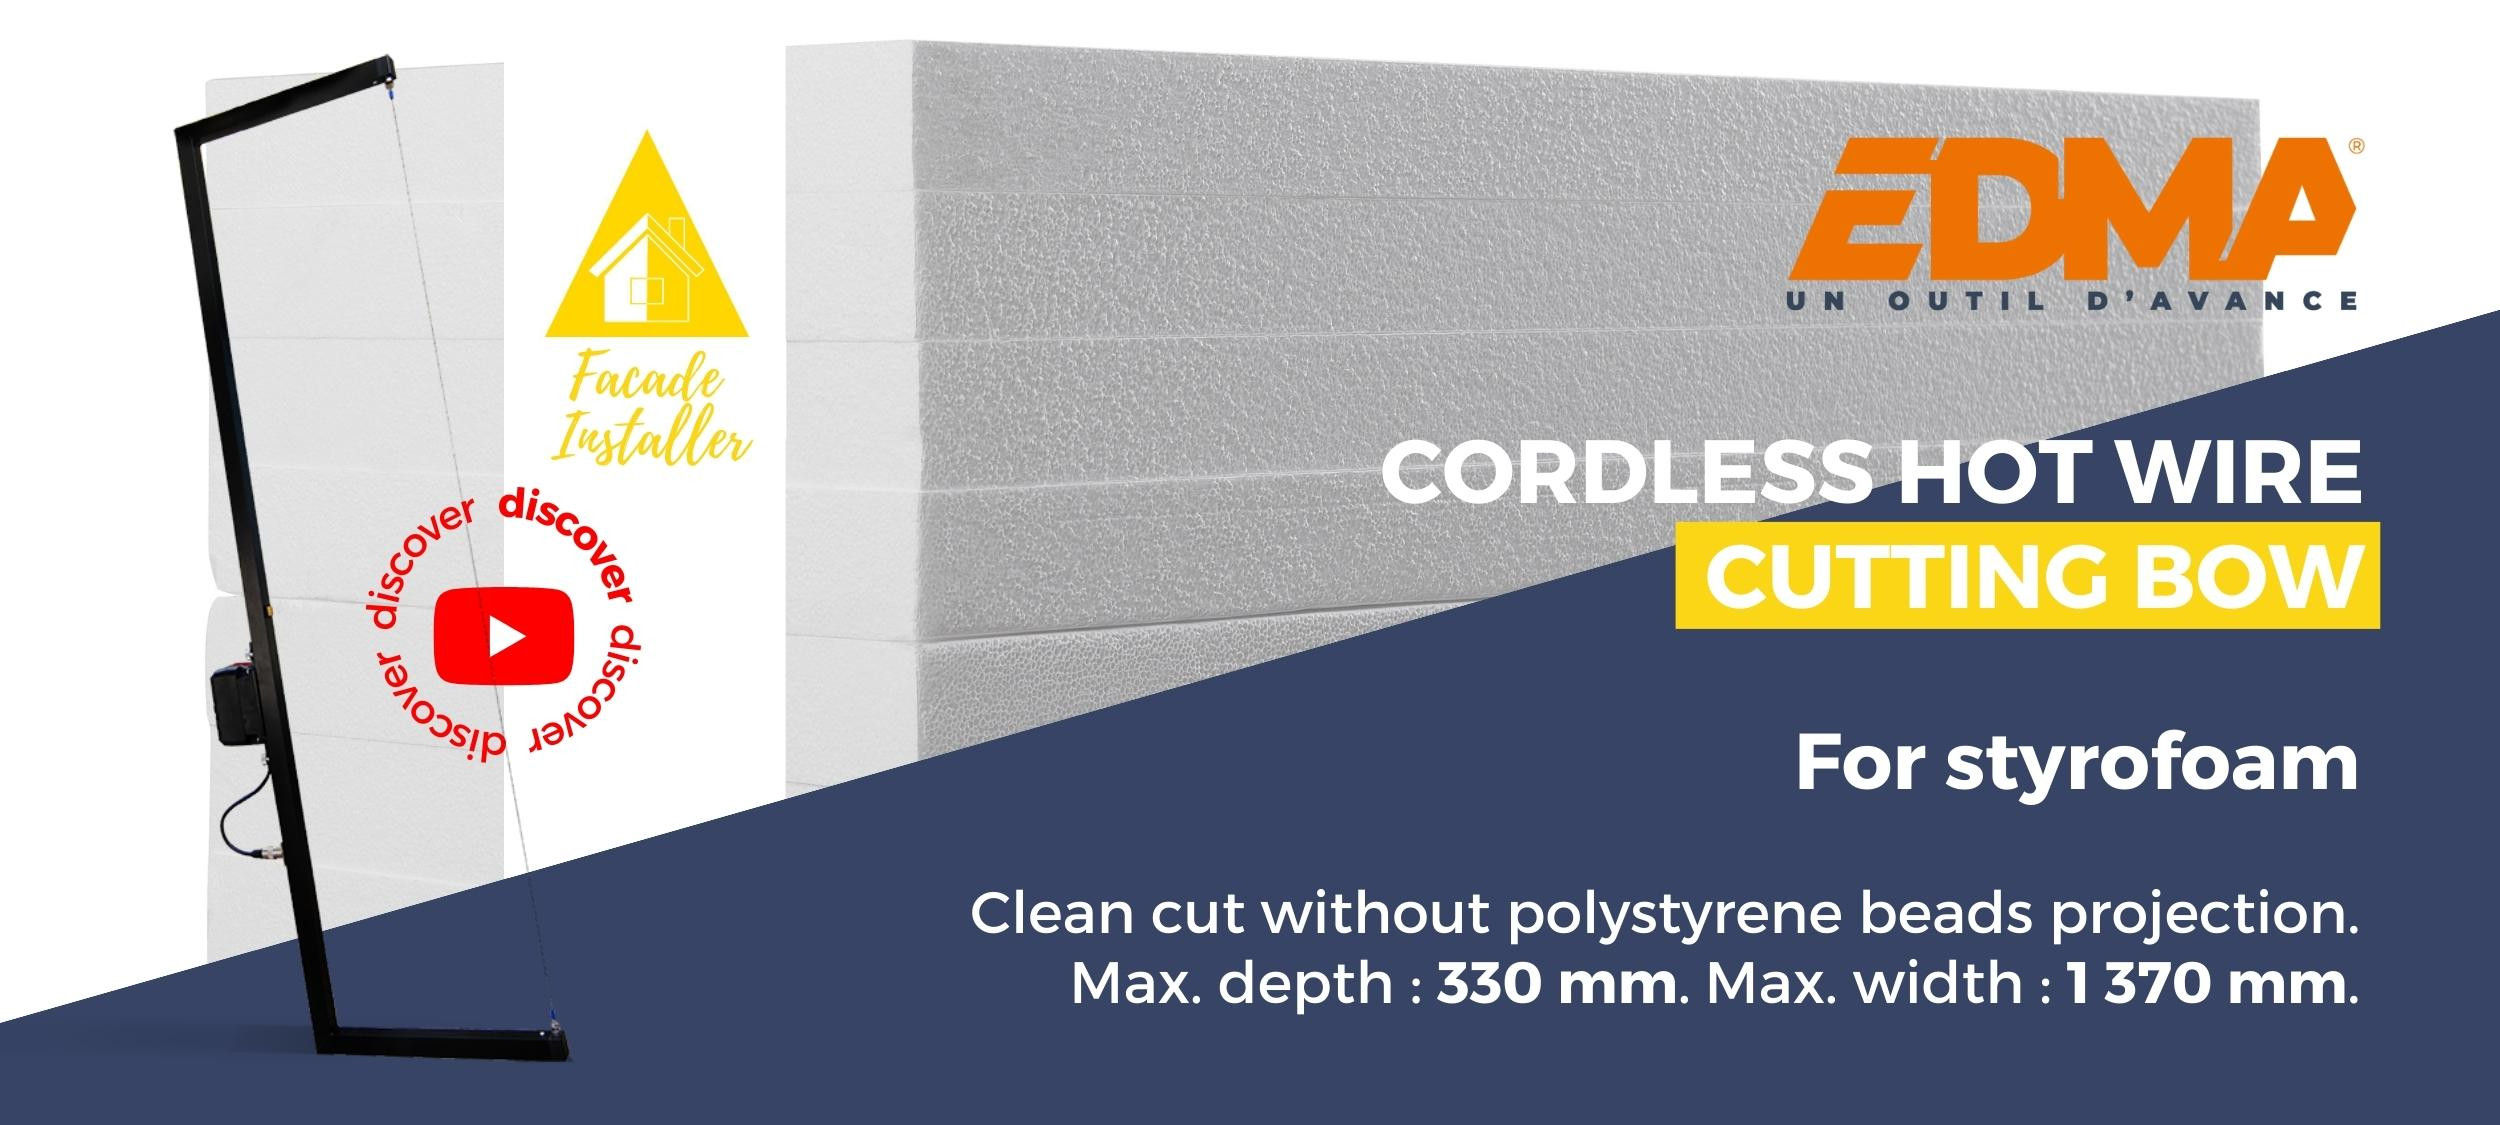 EDMA CORDLESS HOT WIRE CUTTING BOW - For styrofoam